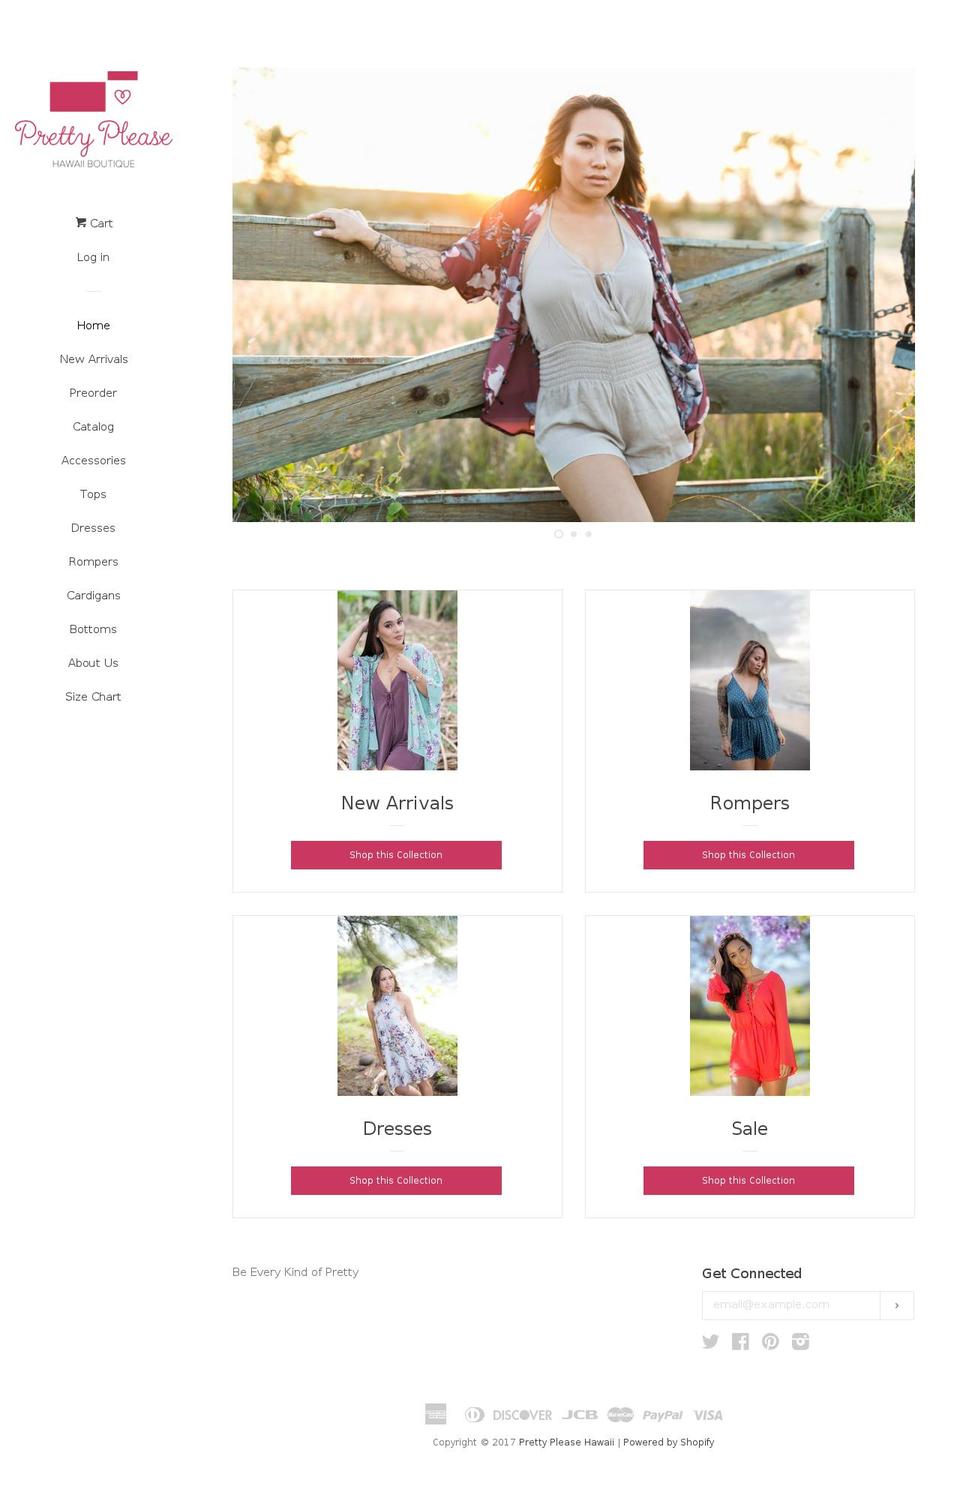 Pop with Installments message Shopify theme site example prettypleasehawaii.com